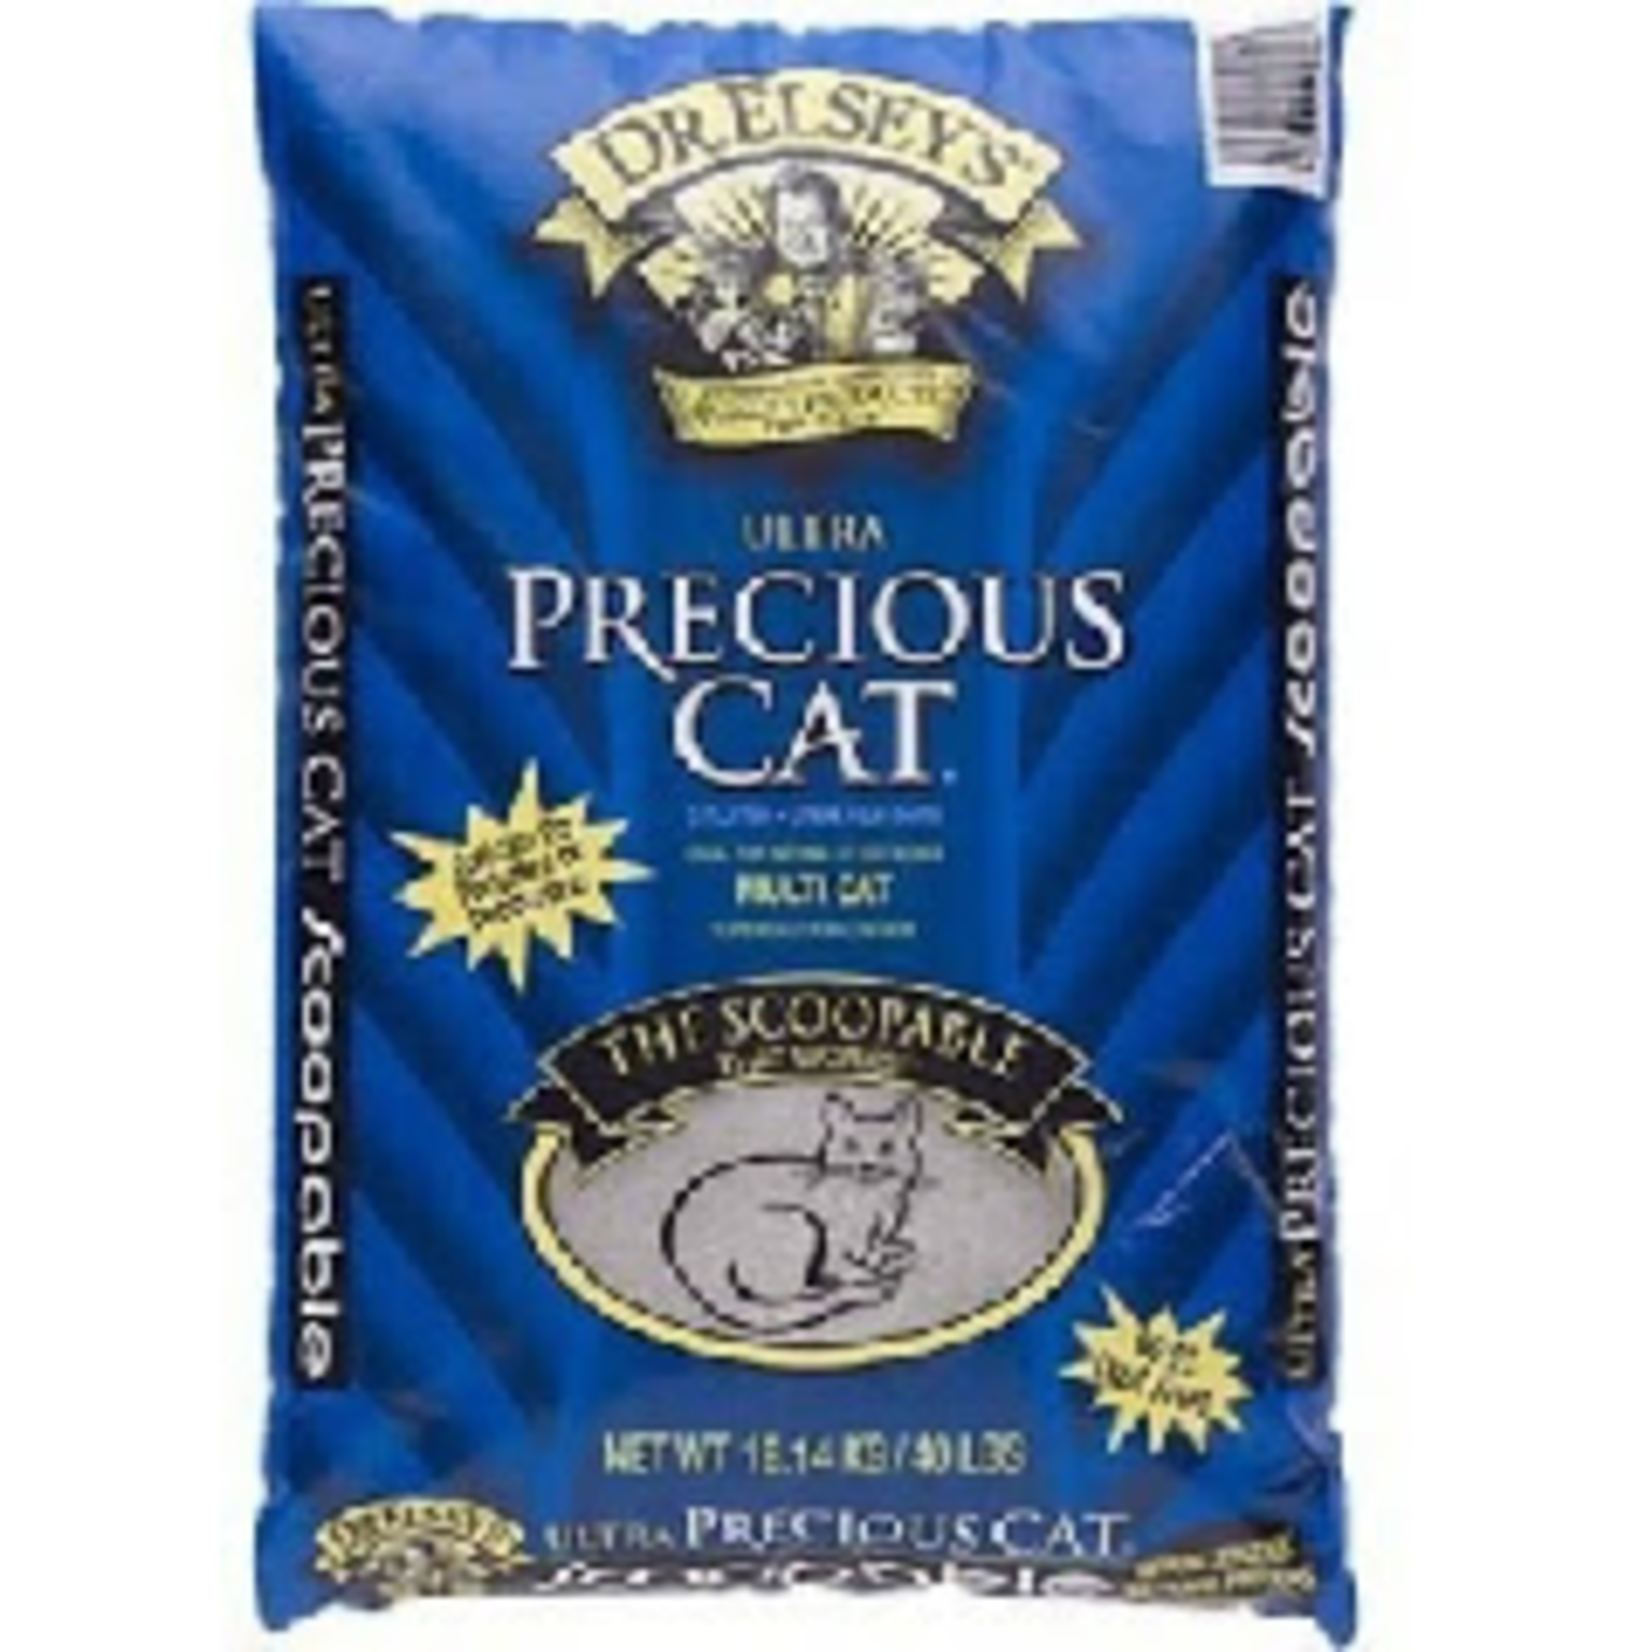 Dr. Elsey's Precious Cat Ultra Unscented 18# Litter